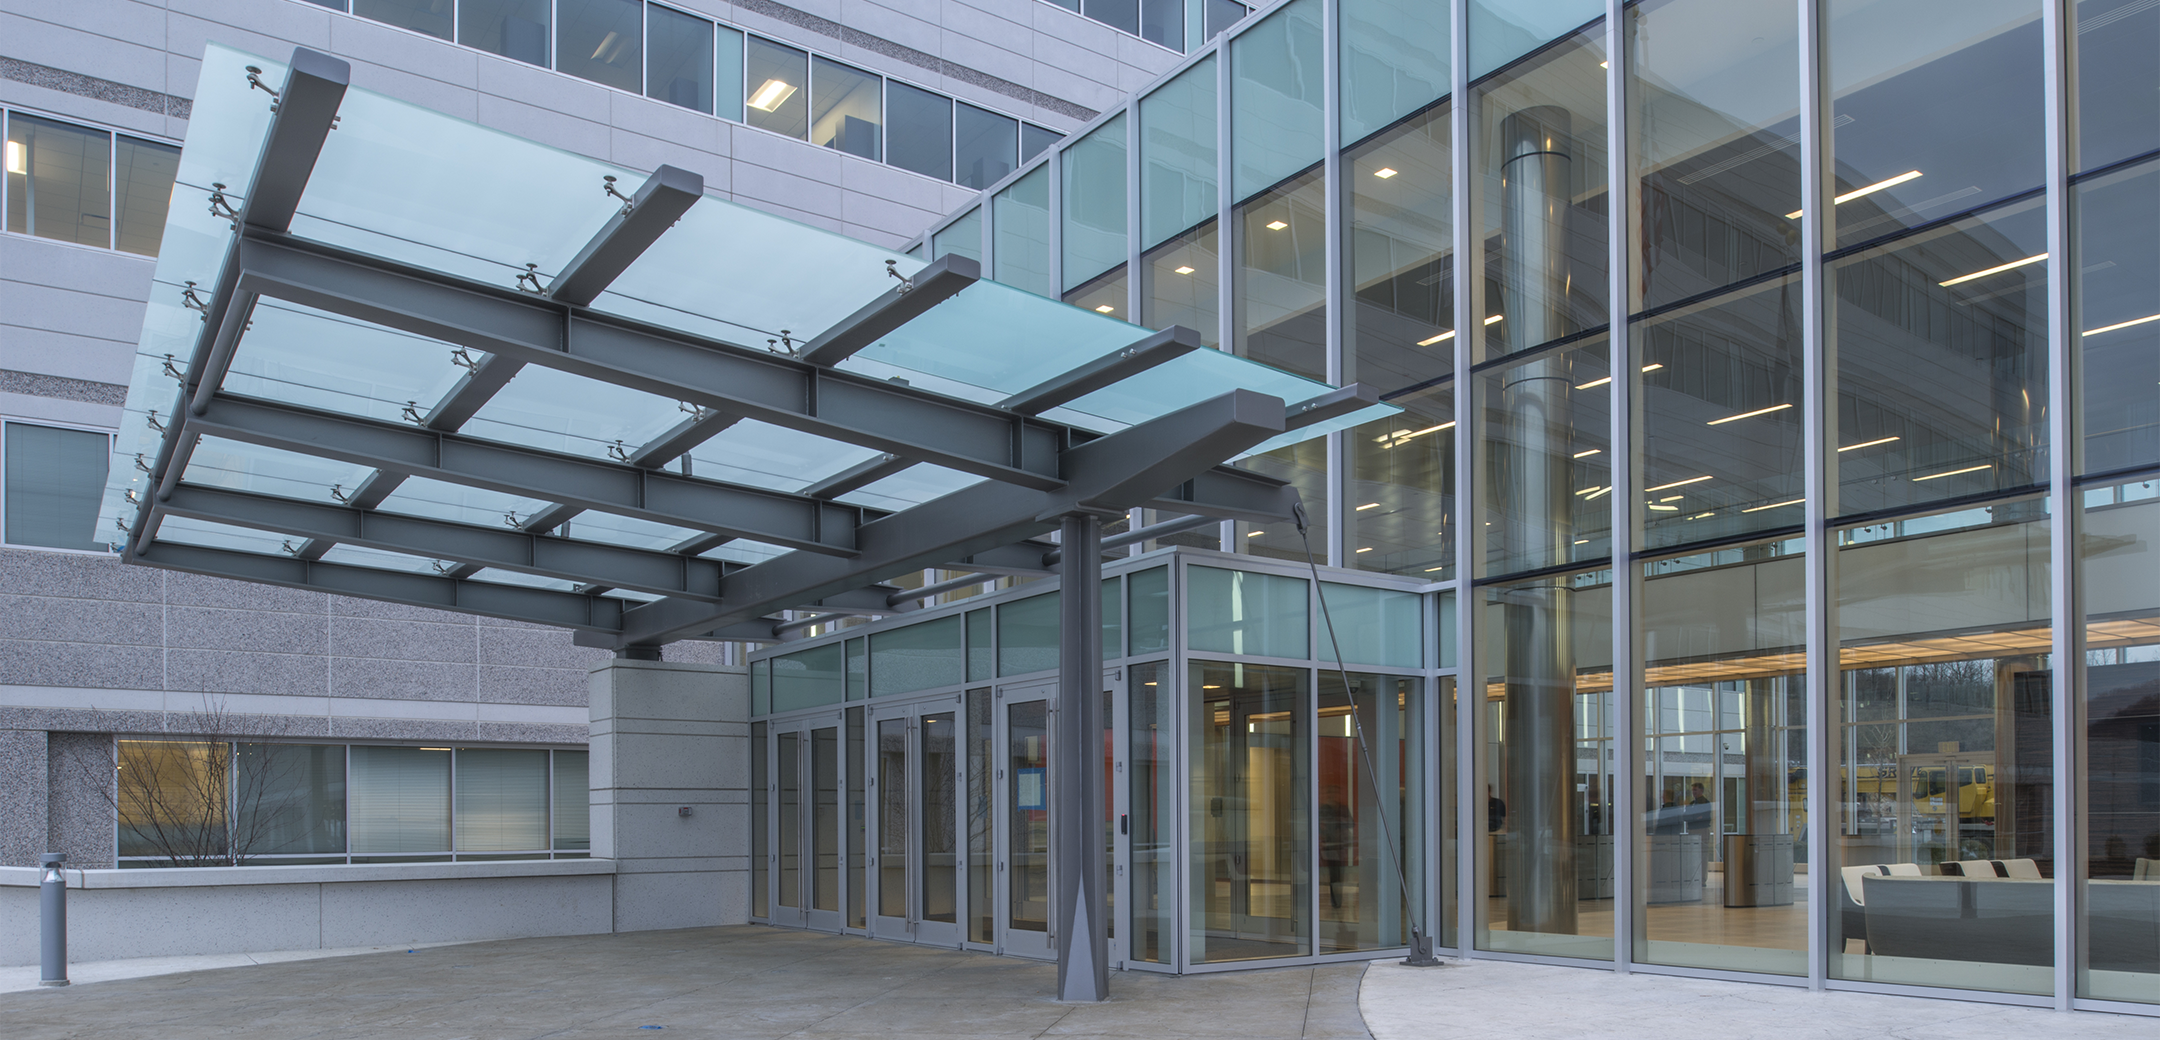 A close up of the glass connecting lobby and main entrance of the Endo pharmaceutical building.